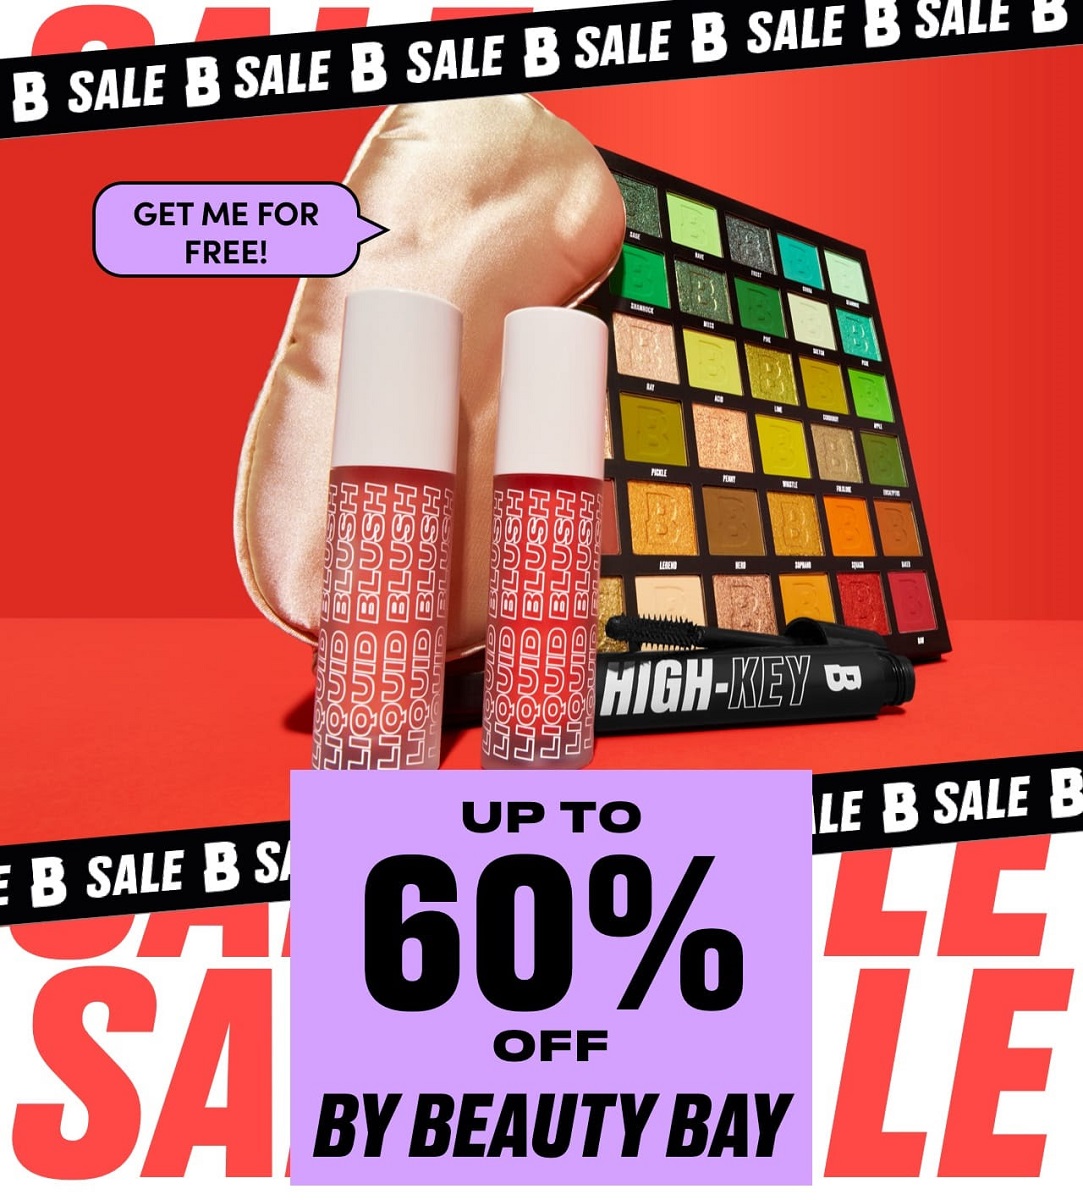 Up to 60% off By BEAUTY BAY